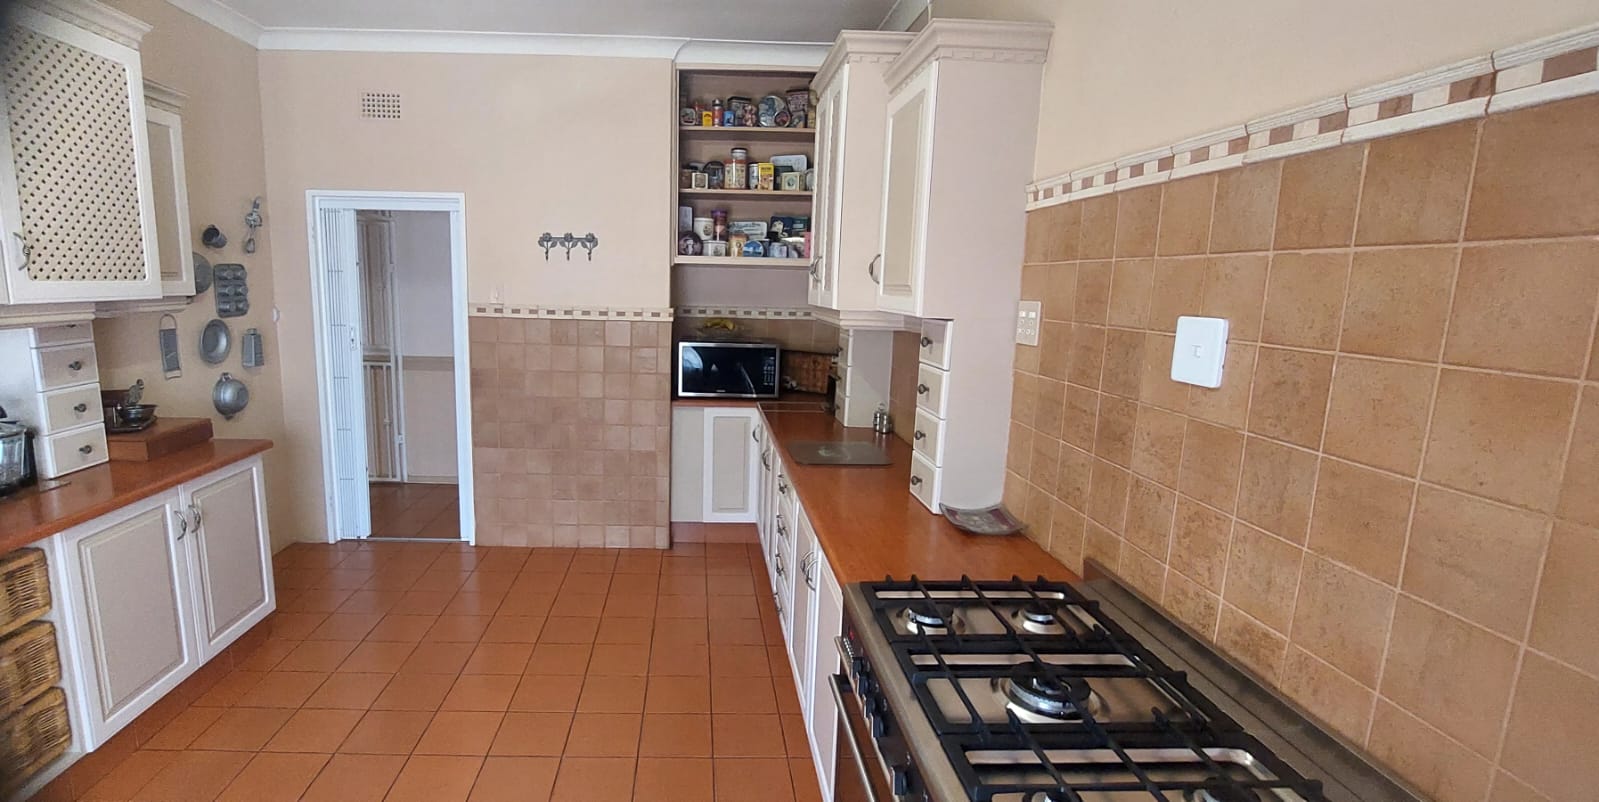 House in Potchefstroom Central - 7e5d785b-2a18-4b4d-b43f-abaff92c3830.jpg